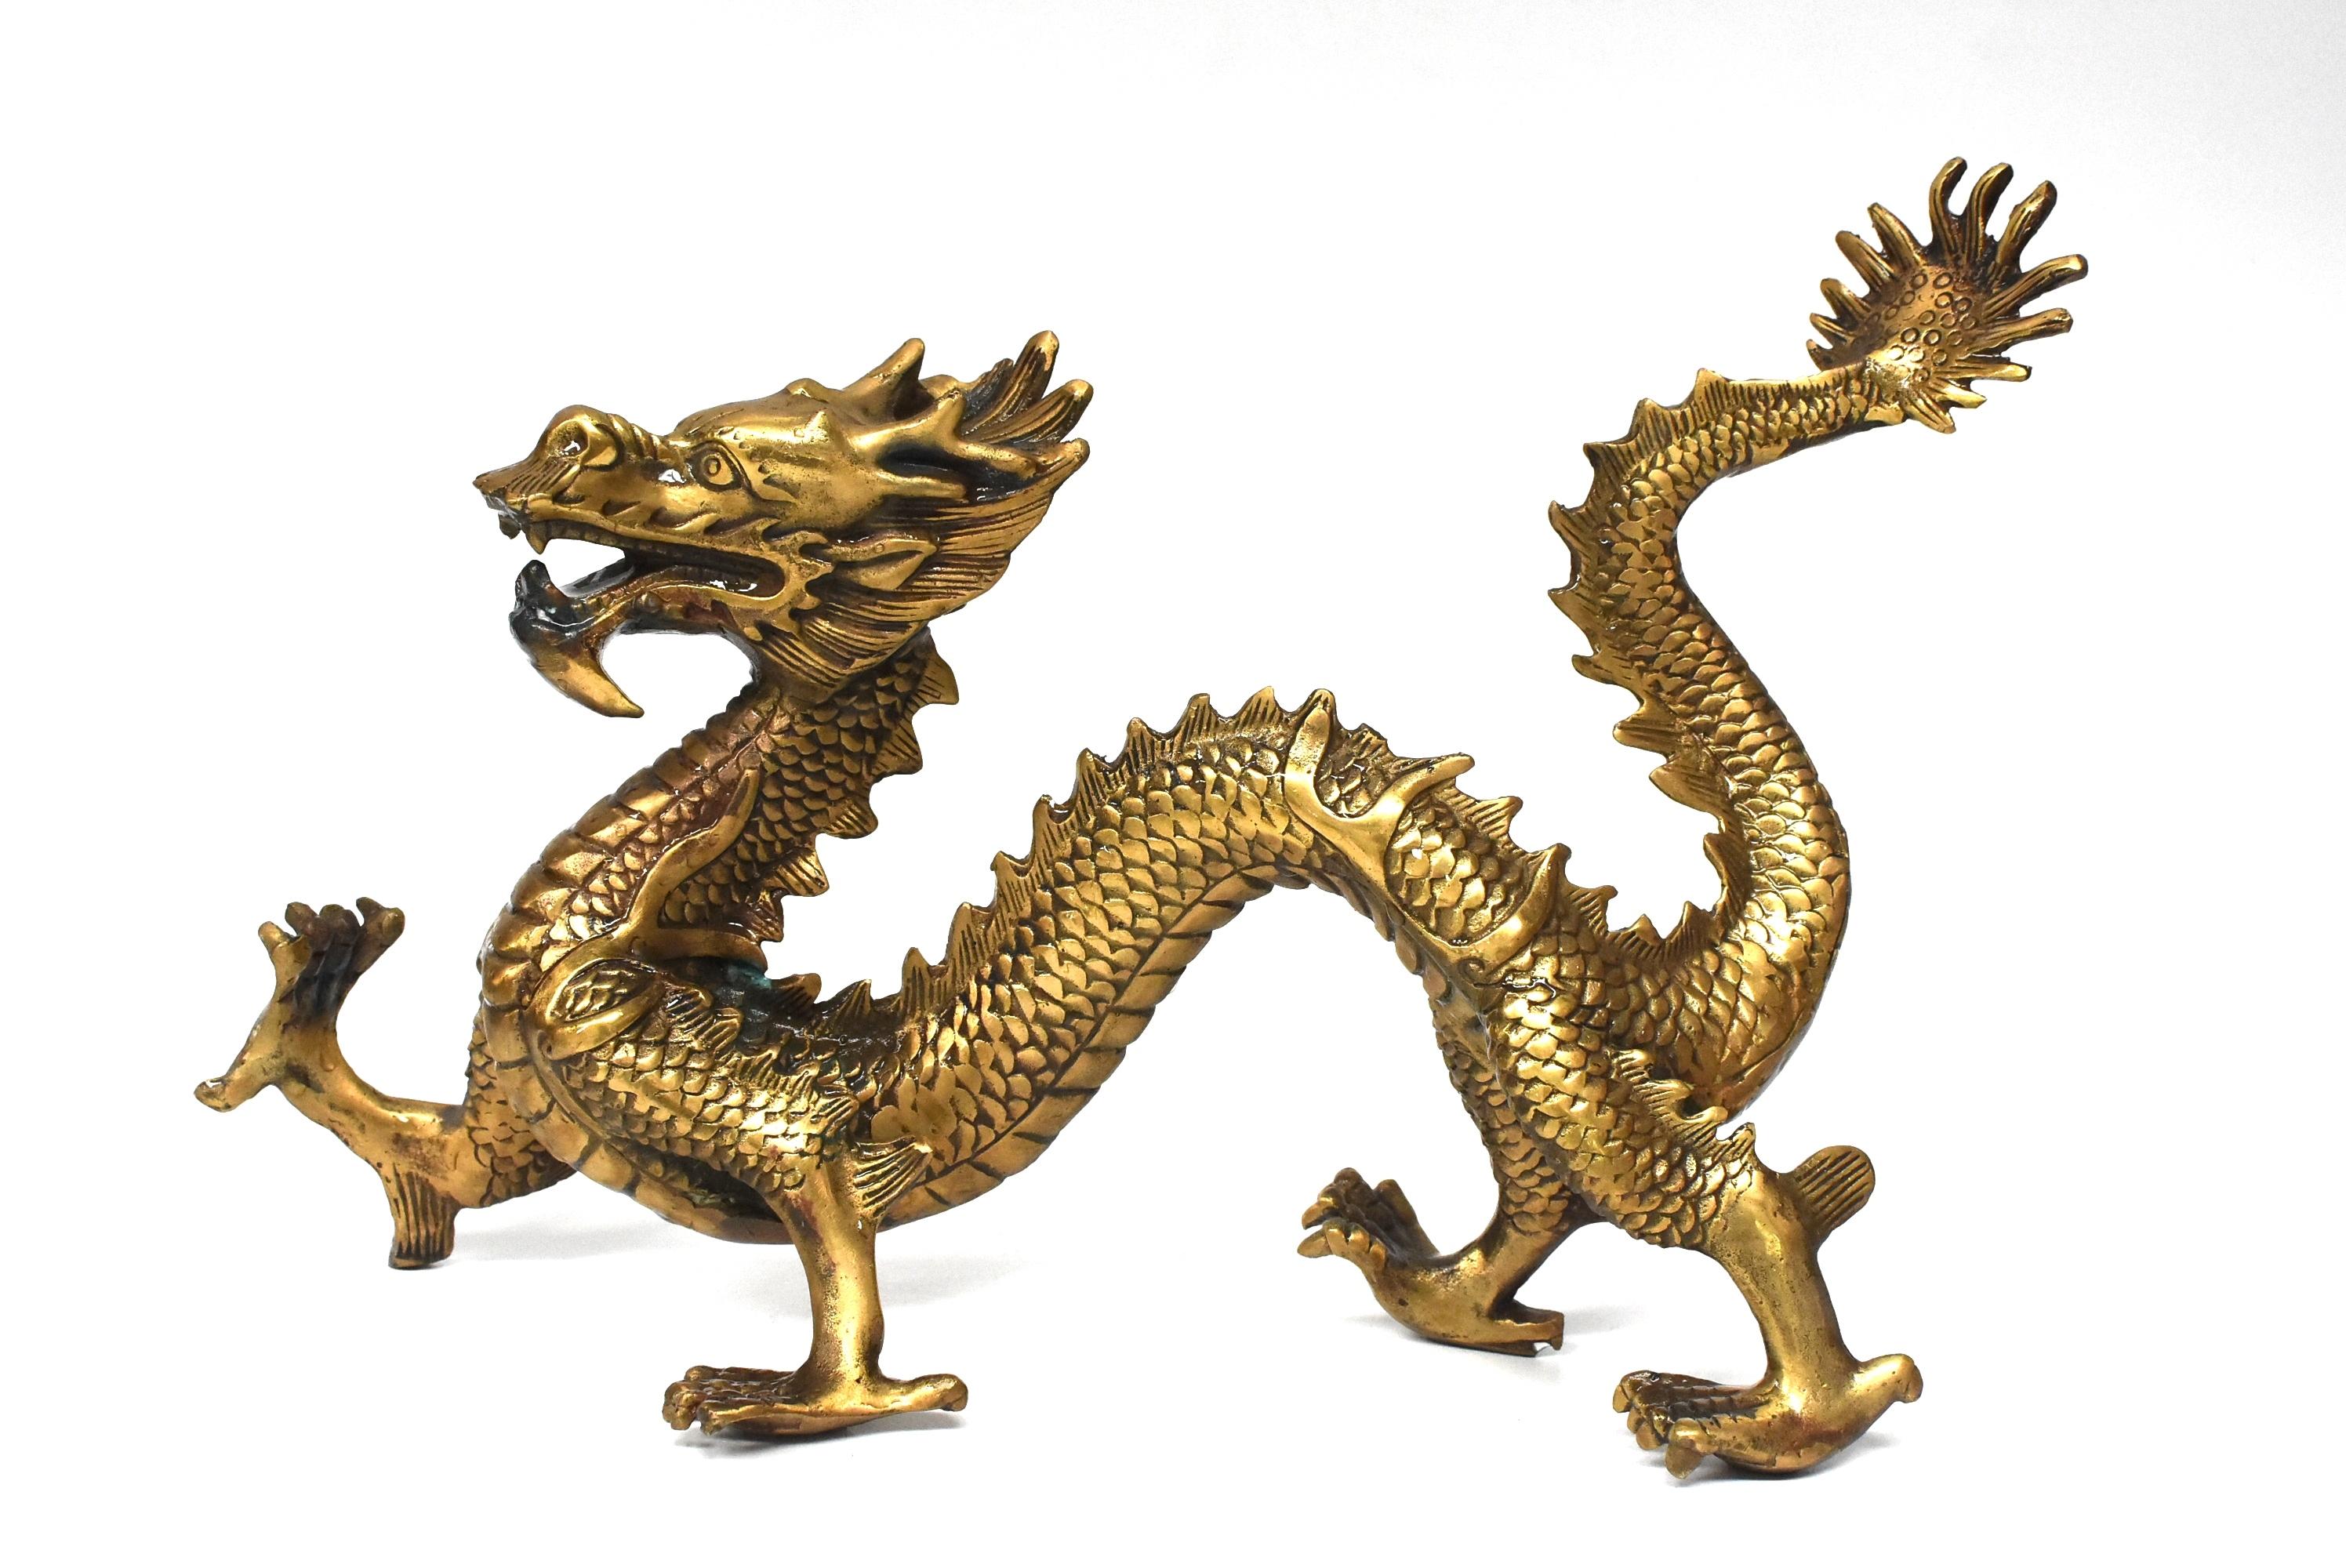 A beautiful brass dragon with fantastic depiction of horns, scales and paws. The dragon is the sign of Chinese Emperor, it symbolizes power and prosperity. A wonderful piece as a display, a feng shui tool and add to your collection.